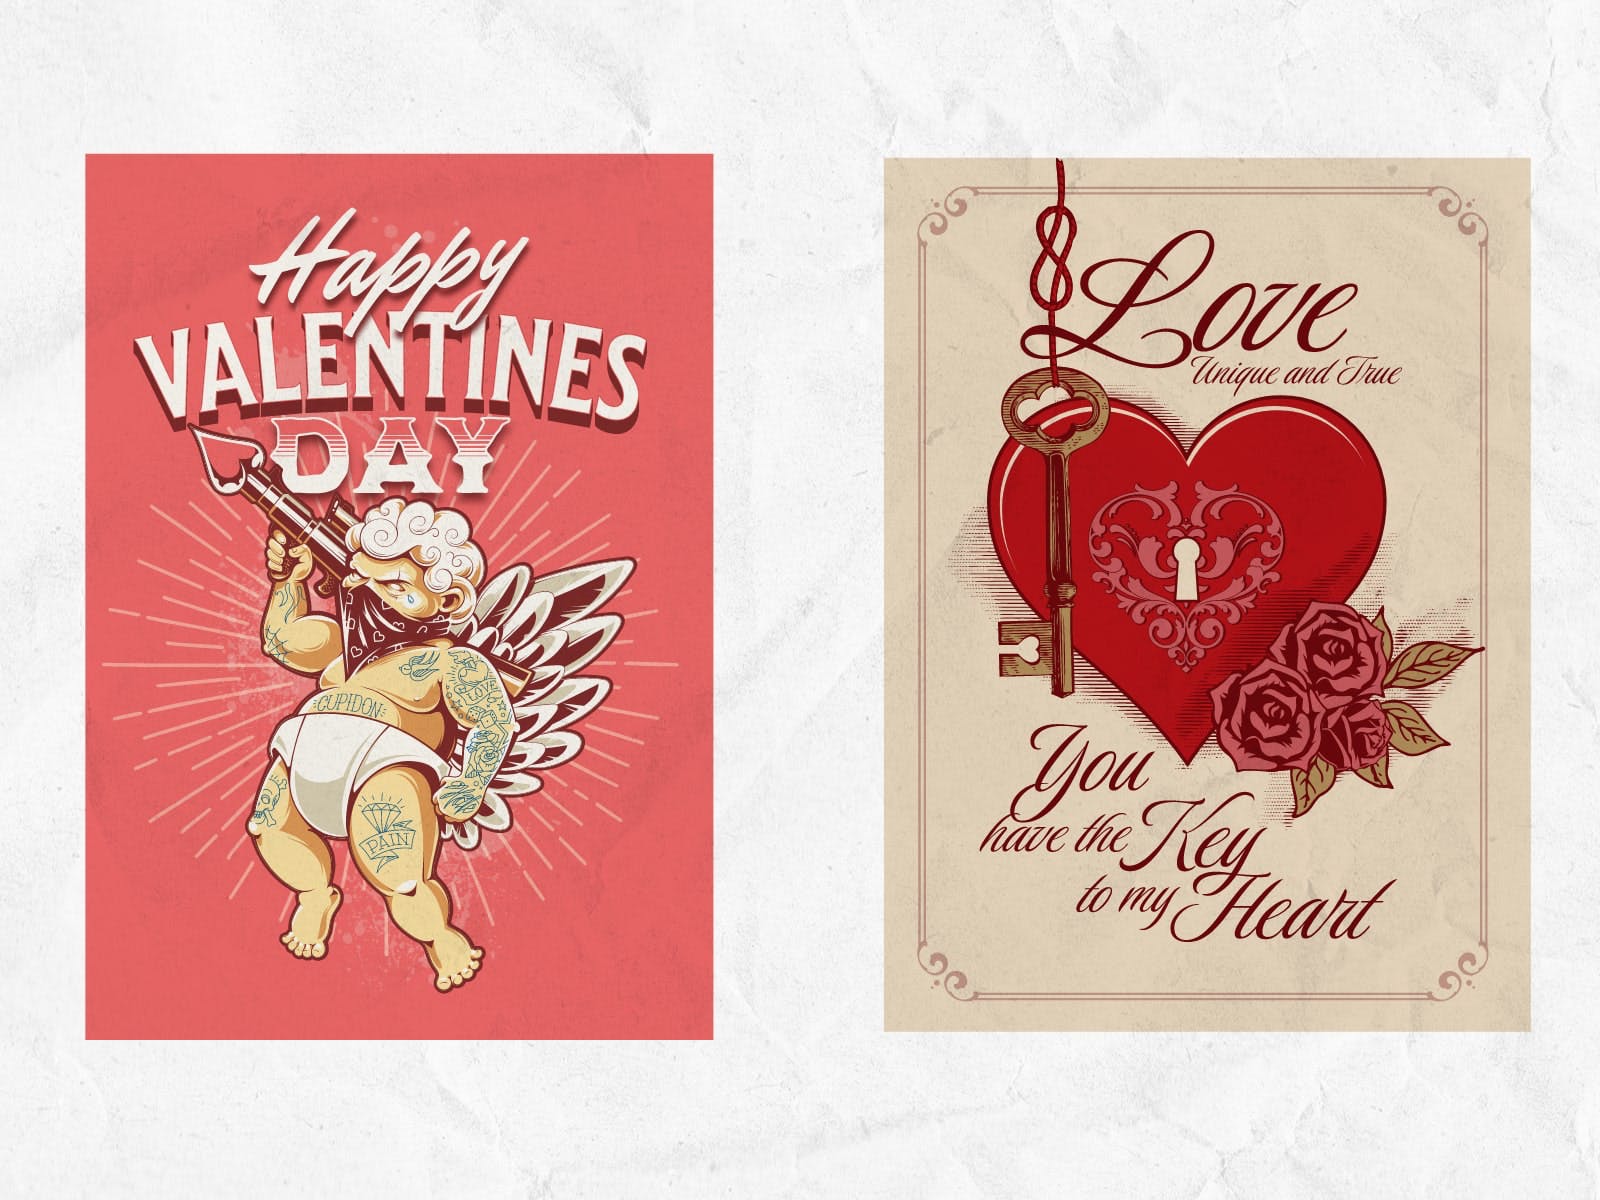 Valentine's Day Card: Collection of Valentine's Day cards